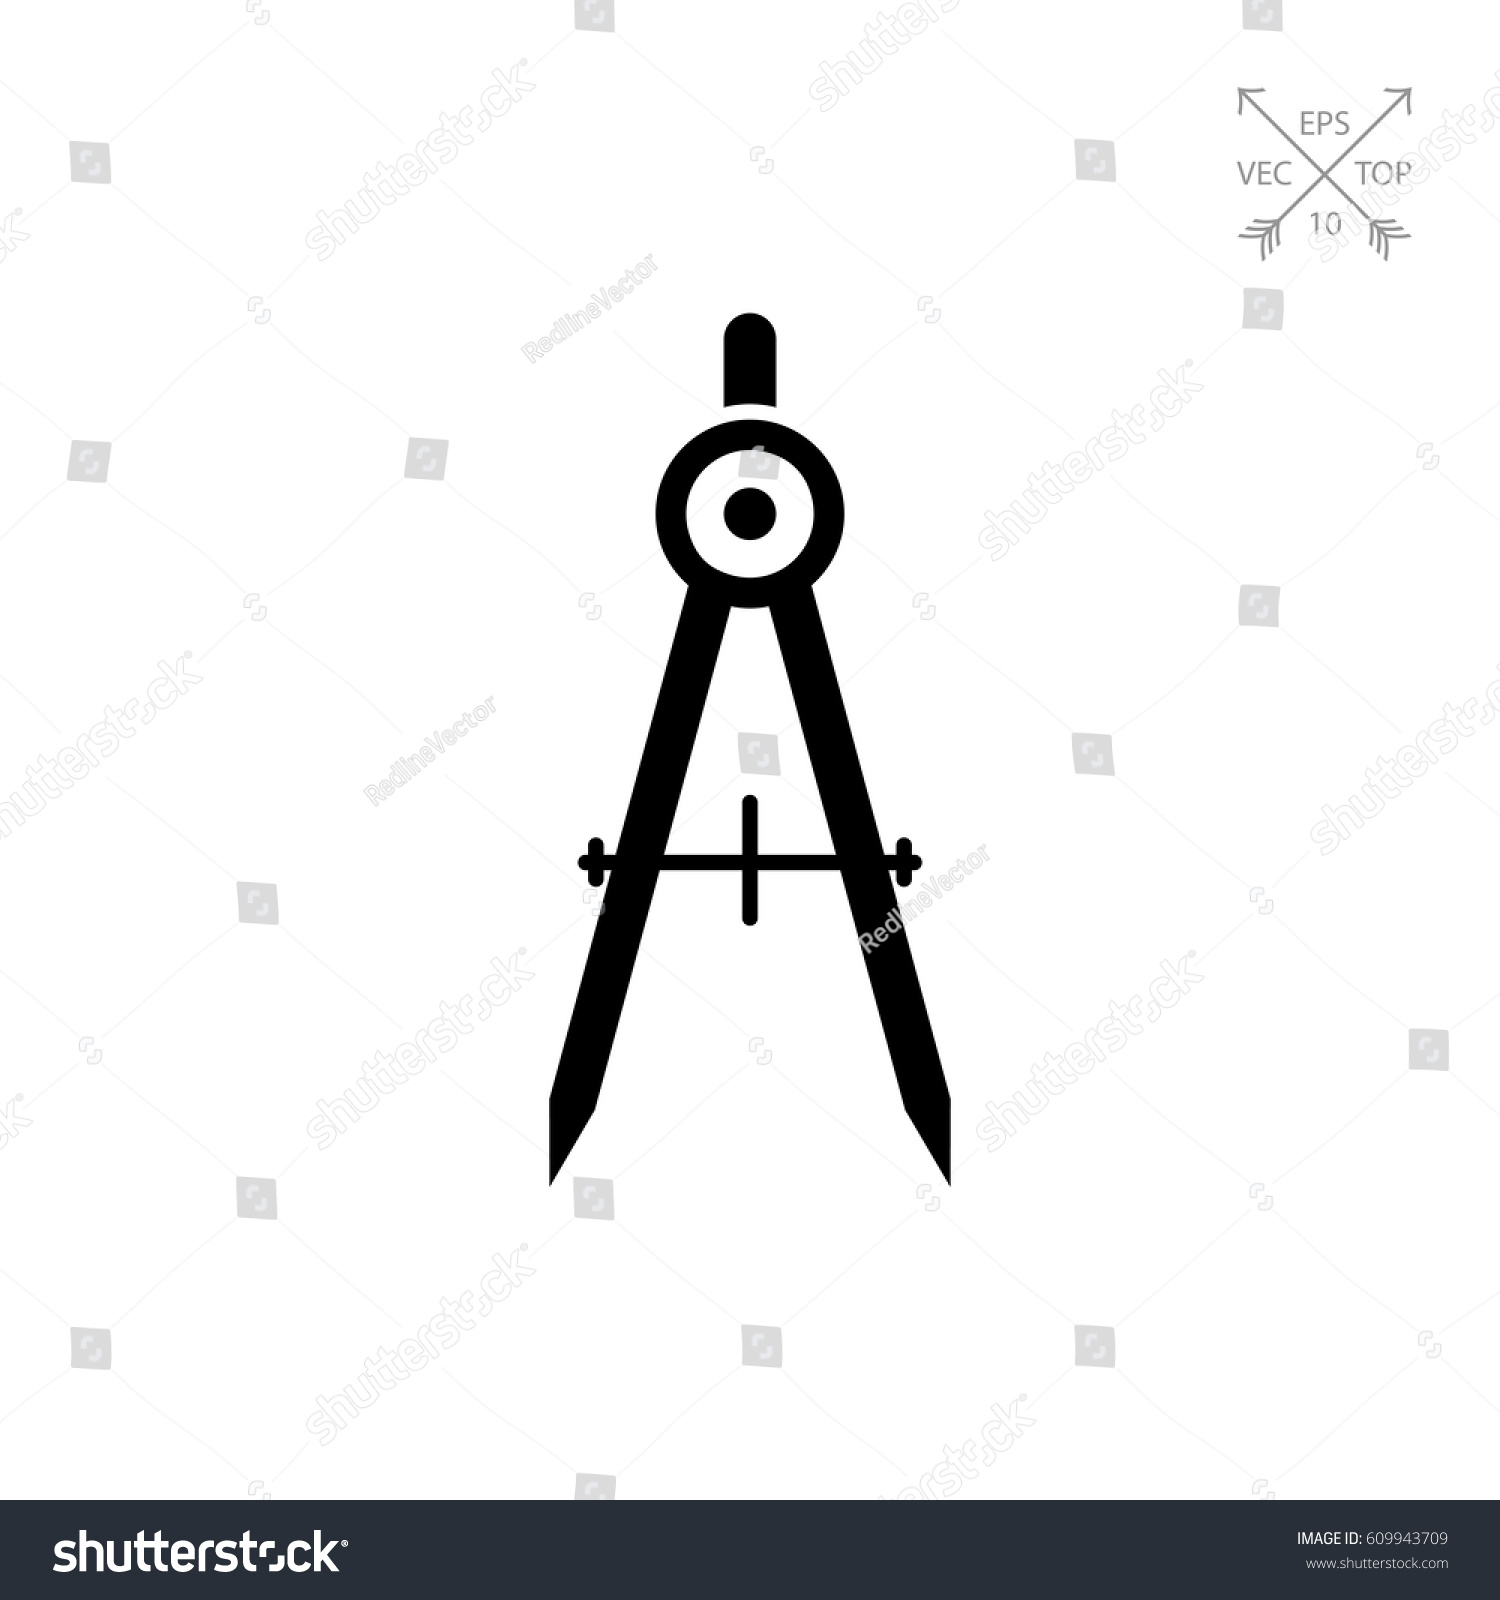 Drawing Compasses Stock Vector 609943709 - Shutterstock